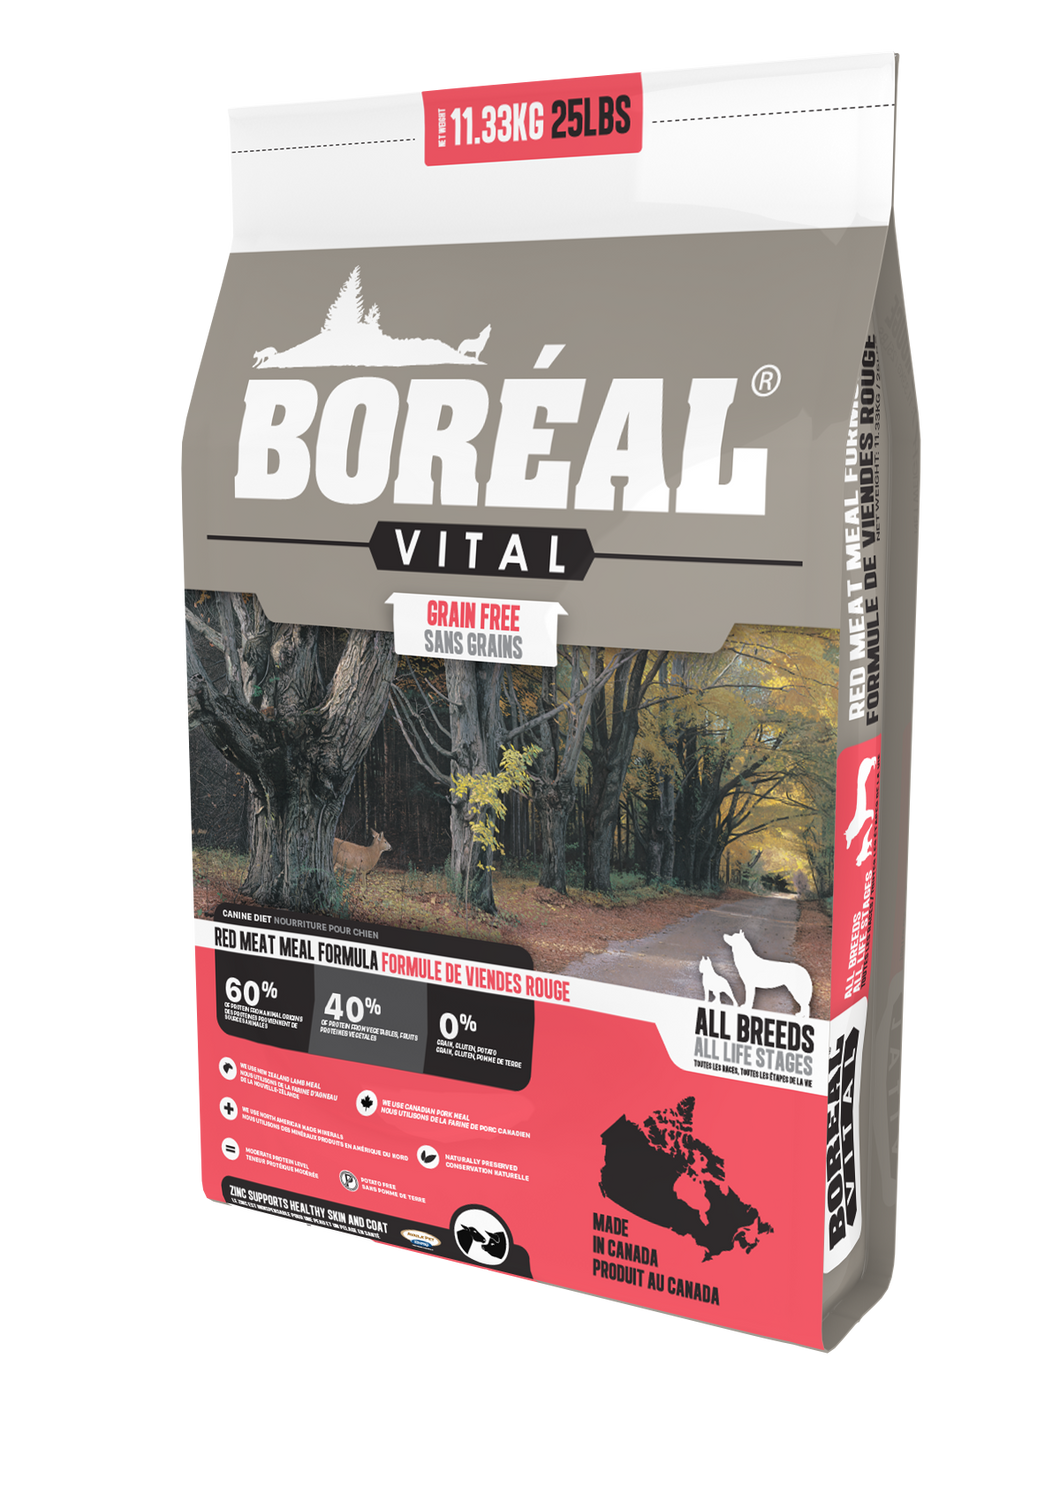 Boréal - Vital All Breed Red Meat Meal Grain Free Dog Food - Limited Ingredient Diet - Canadian Pork Meat Meal - Low Glycemic - Low Carb - North American Minerals - Naturally Preserved - New Zealand Lamb Meal - Potato Free - Made in Canada